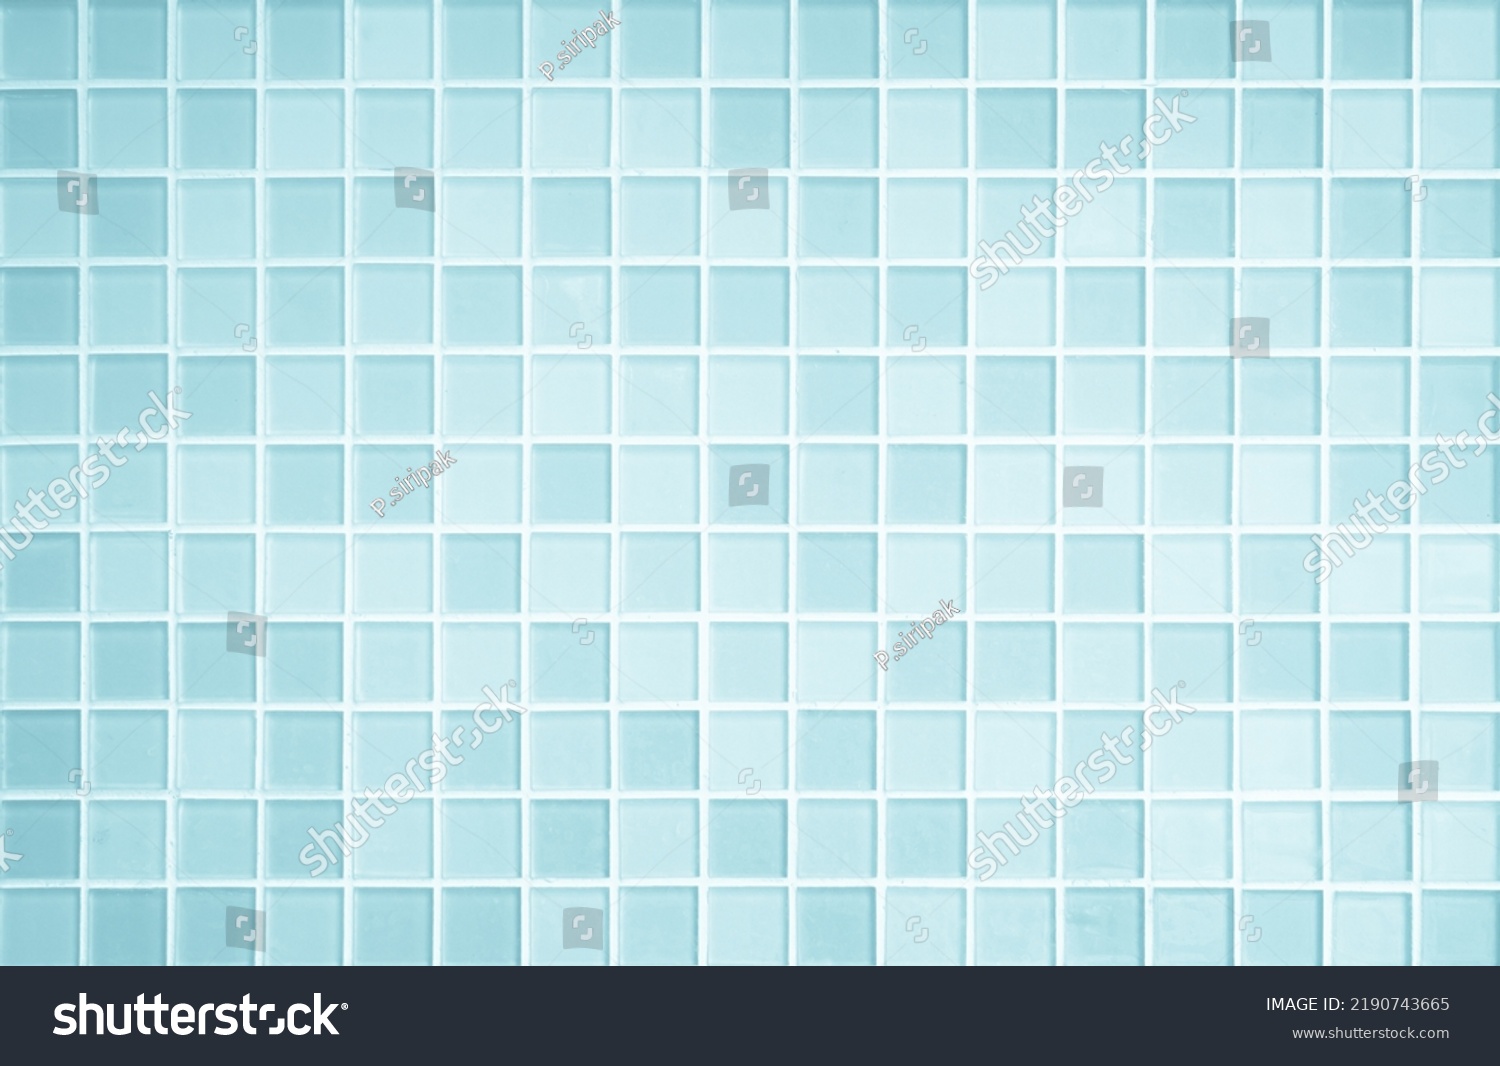 Blue light ceramic wall chequered and floor tiles mosaic background in bathroom, kitchen. Design pattern geometric with grid wallpaper texture decoration pool. Simple seamless abstract surface clean. #2190743665